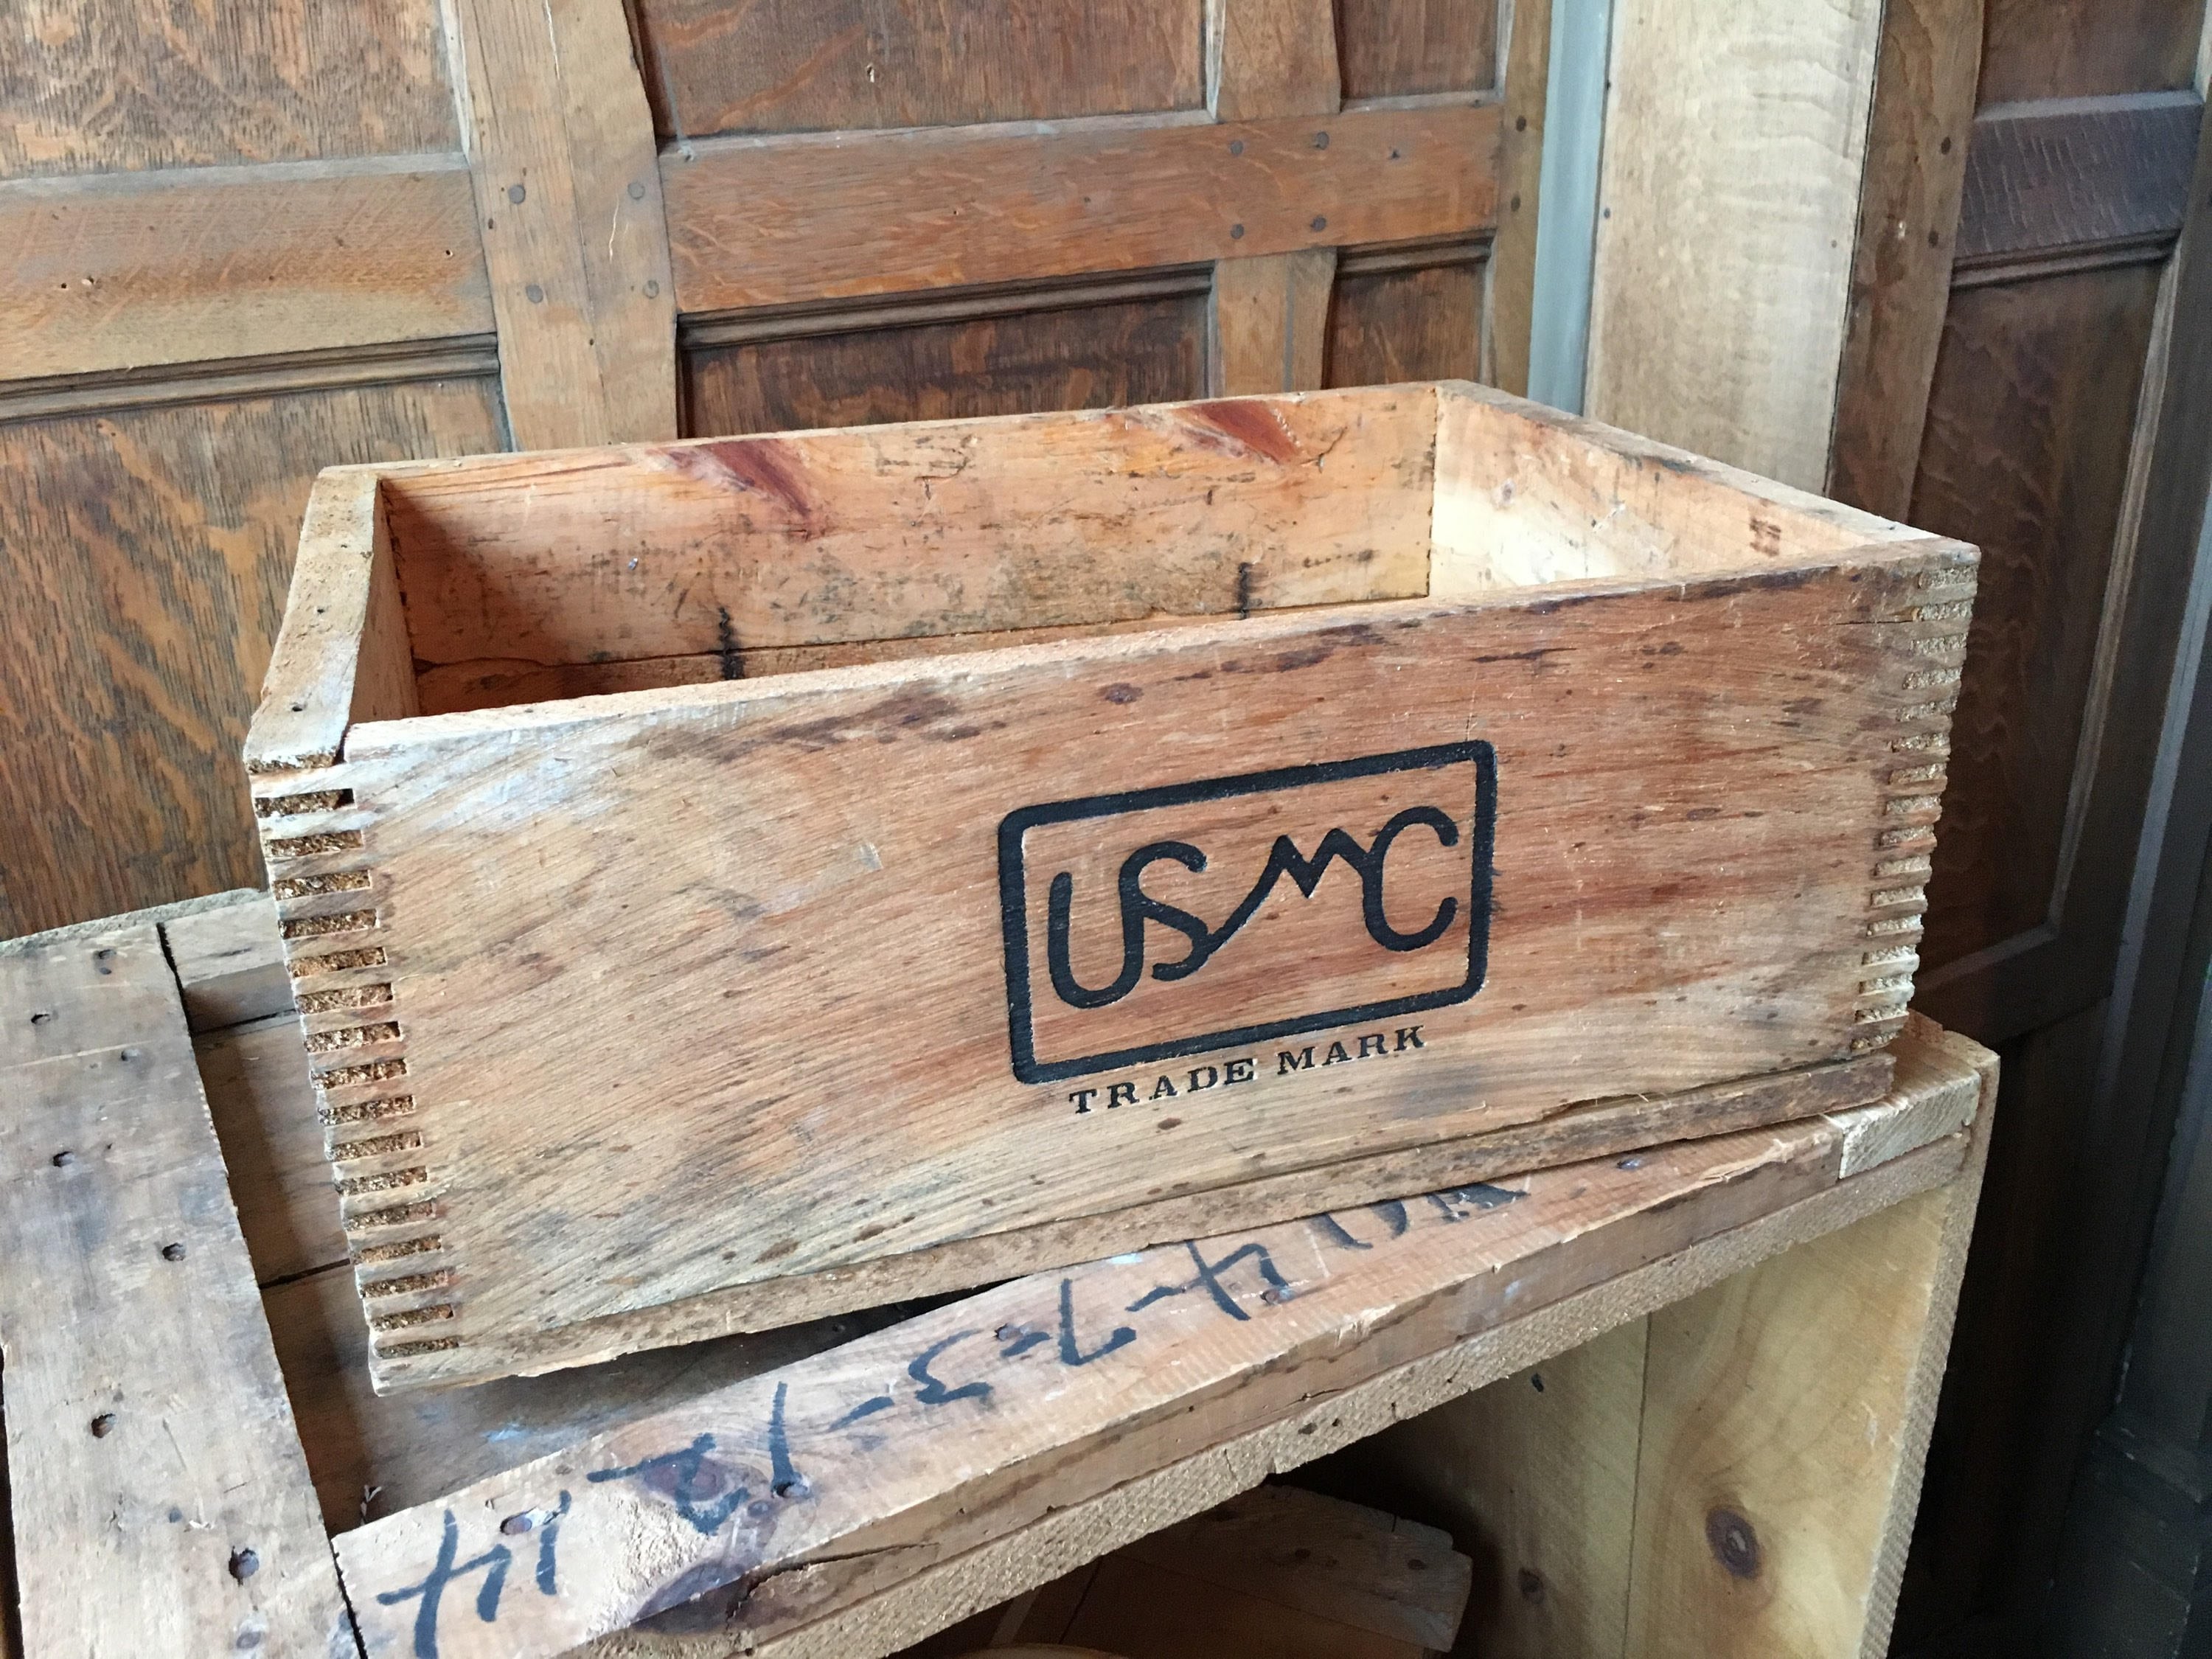 Vintage Wood Crate Usmc Shipping Crate Rustic Industrial Storage